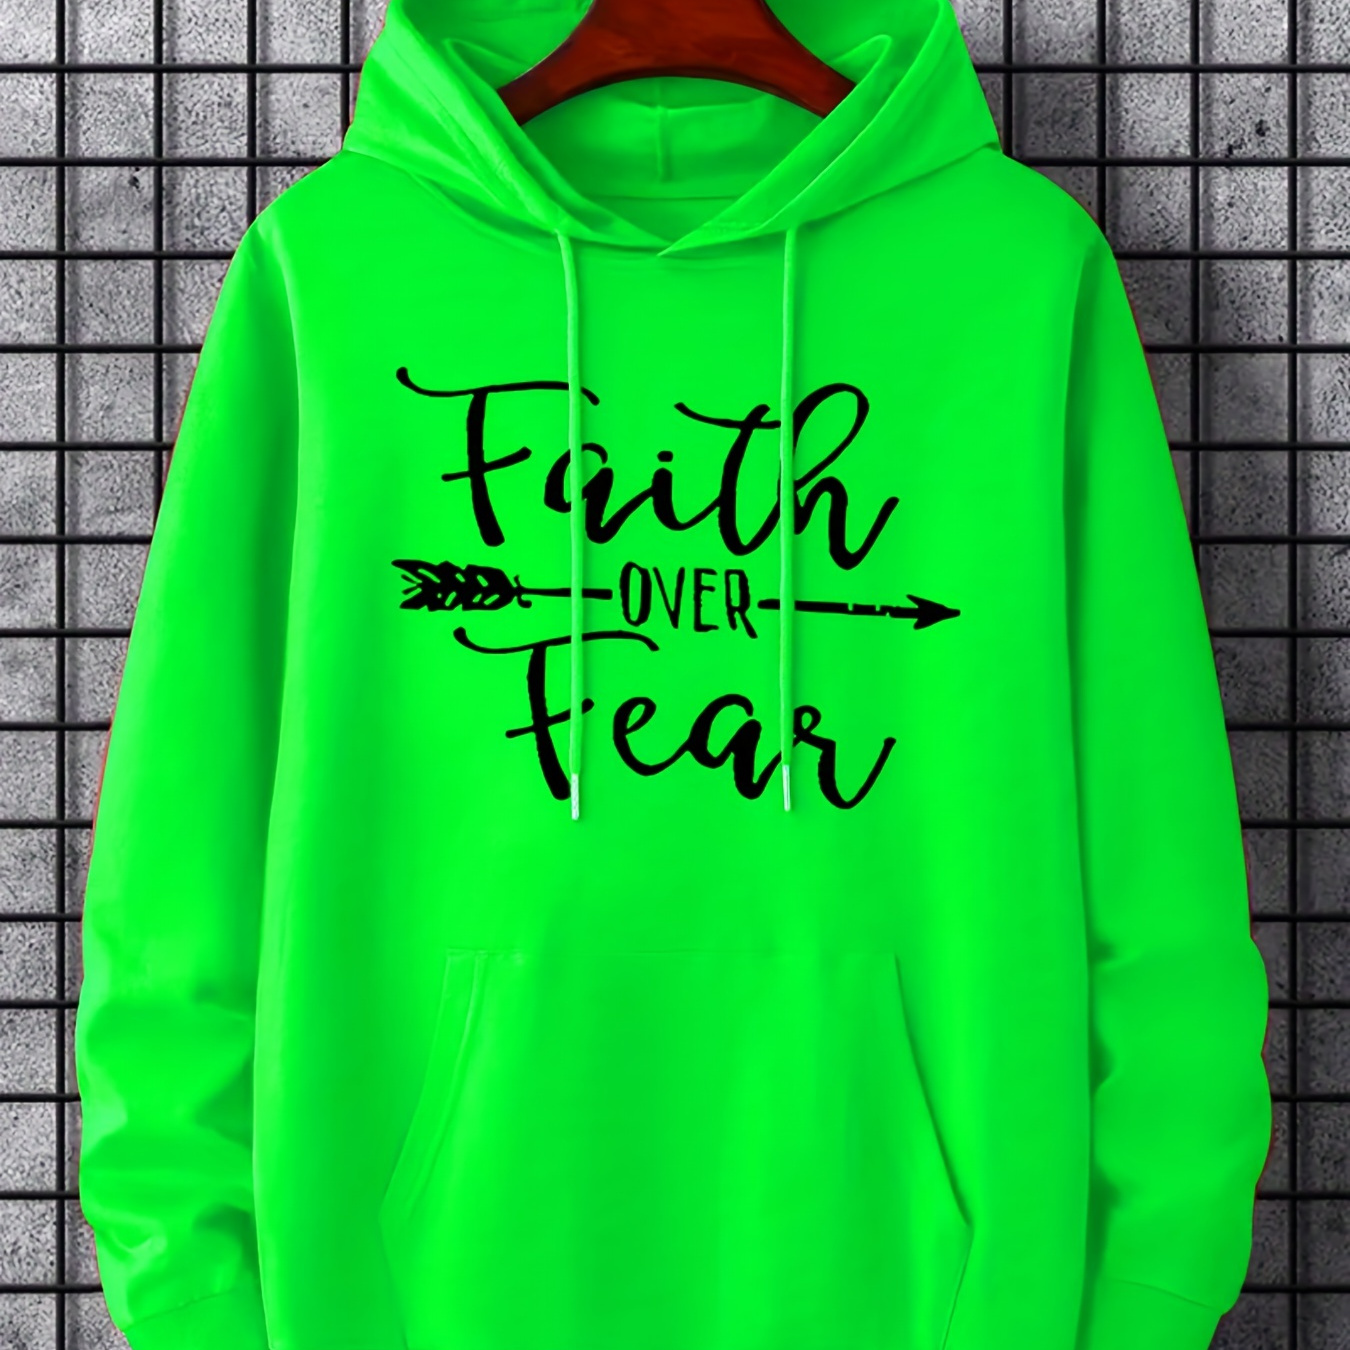 

faith Over Fear" Graphic Print Men's Casual Hoodies, Drawstring Comfortable Oversized Hooded Pullover Sweatshirt Plus Size Best Sellers